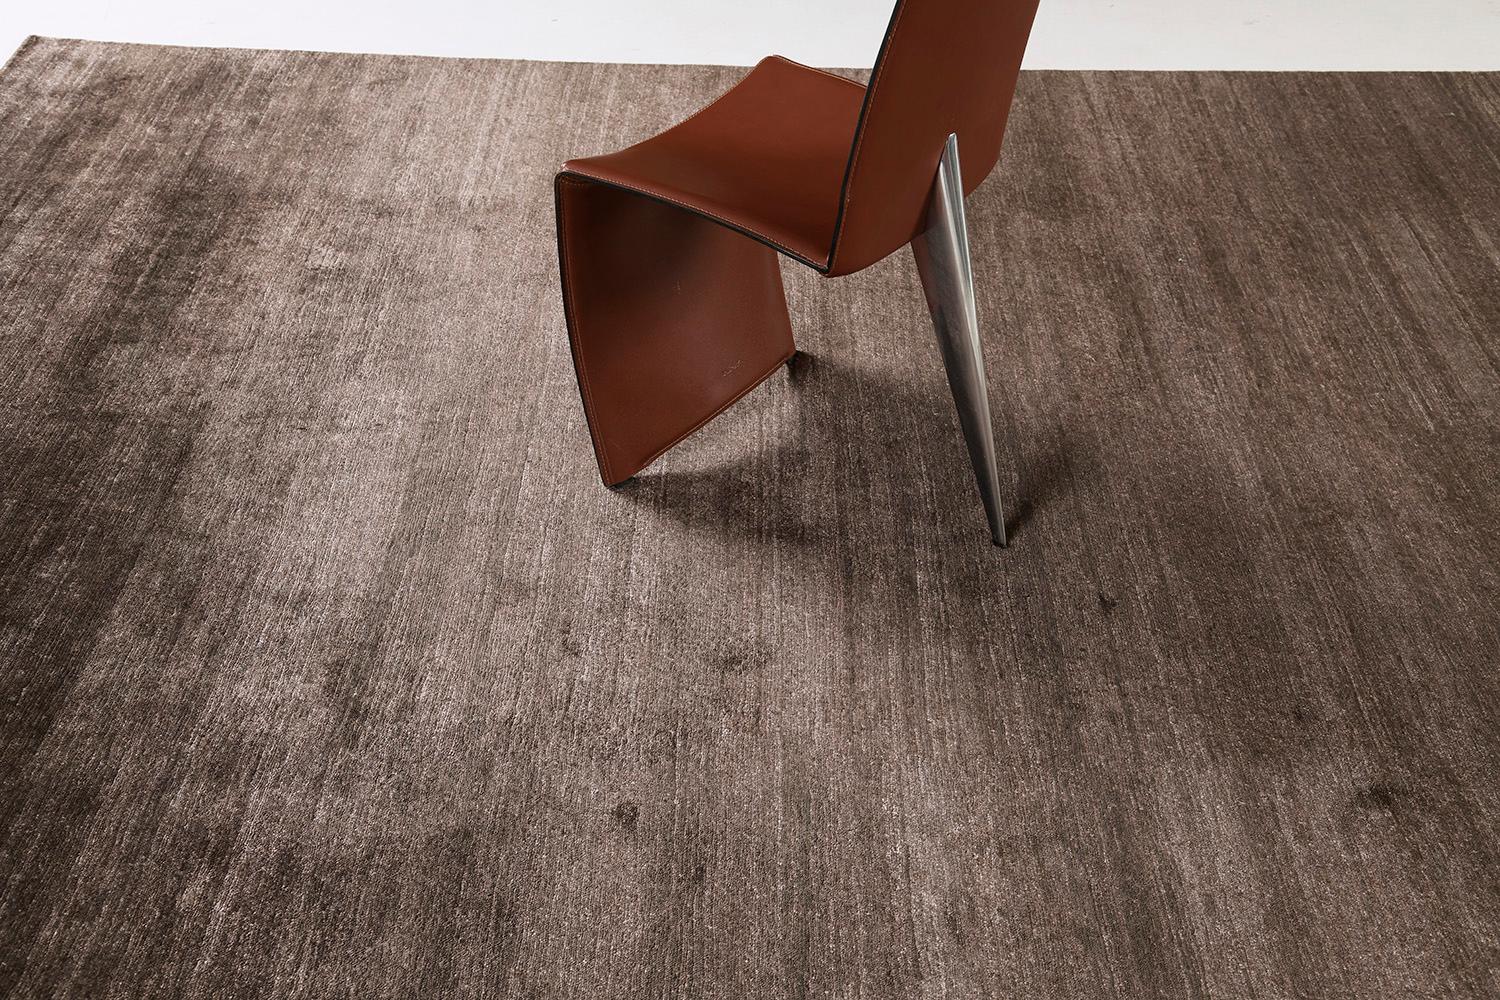 Dara' is a most sought after rug in Elan Collection in the mesmerizing shade of chocolate brown. Its simplicity does not take away from the rug's luxurious quality and beautiful sheen made of bamboo silk. Dara is a fabulous rug for any design